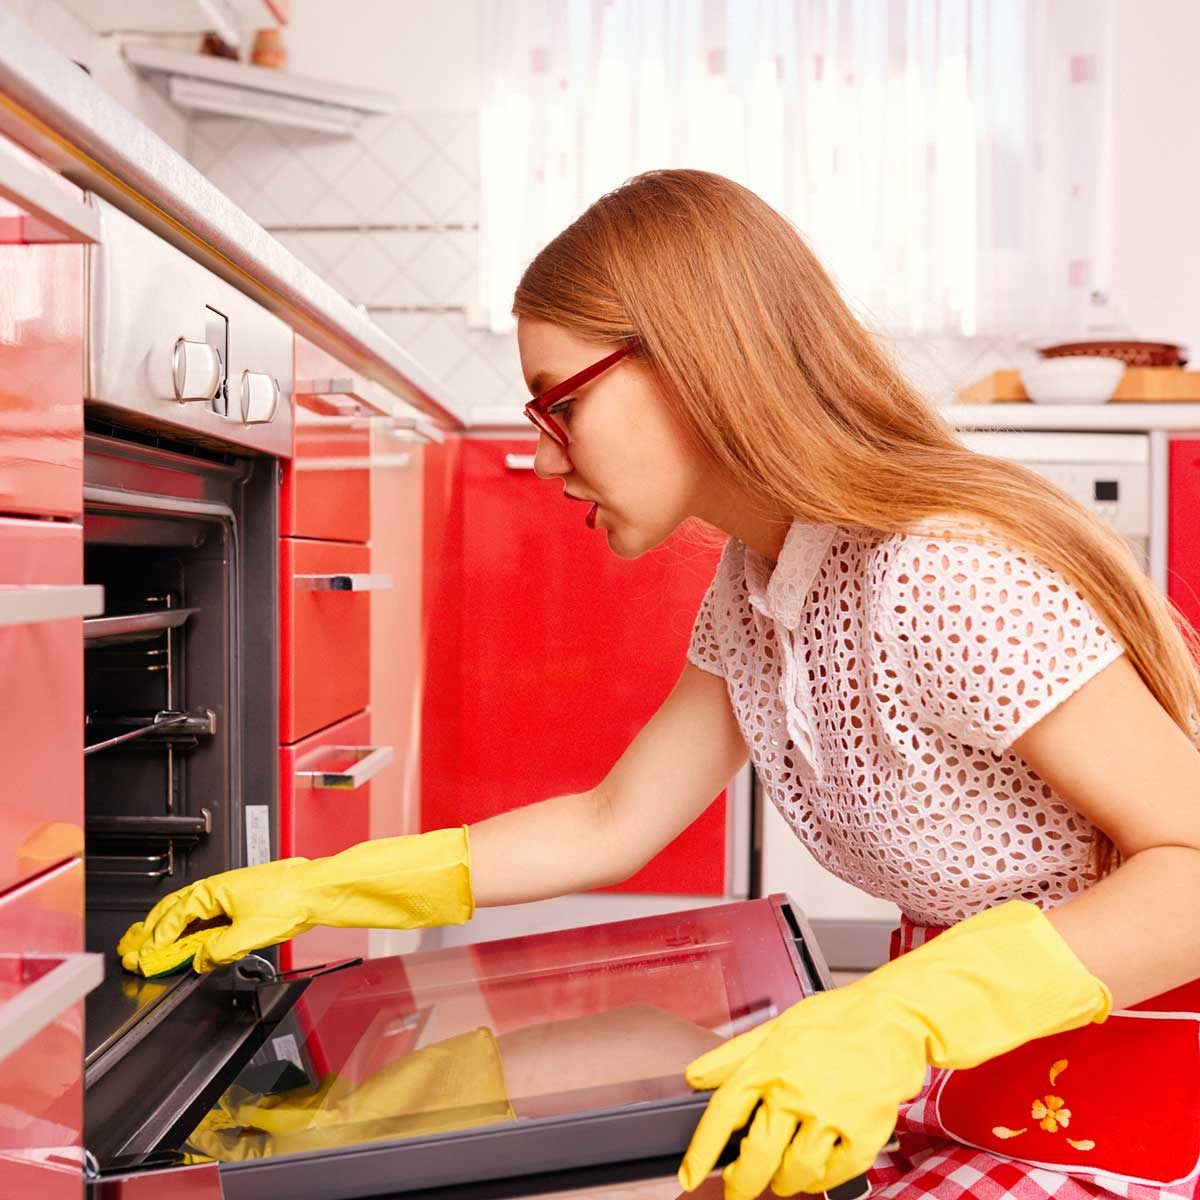 Baking soda and Vinegar - Does not clean your oven - My Women Stuff